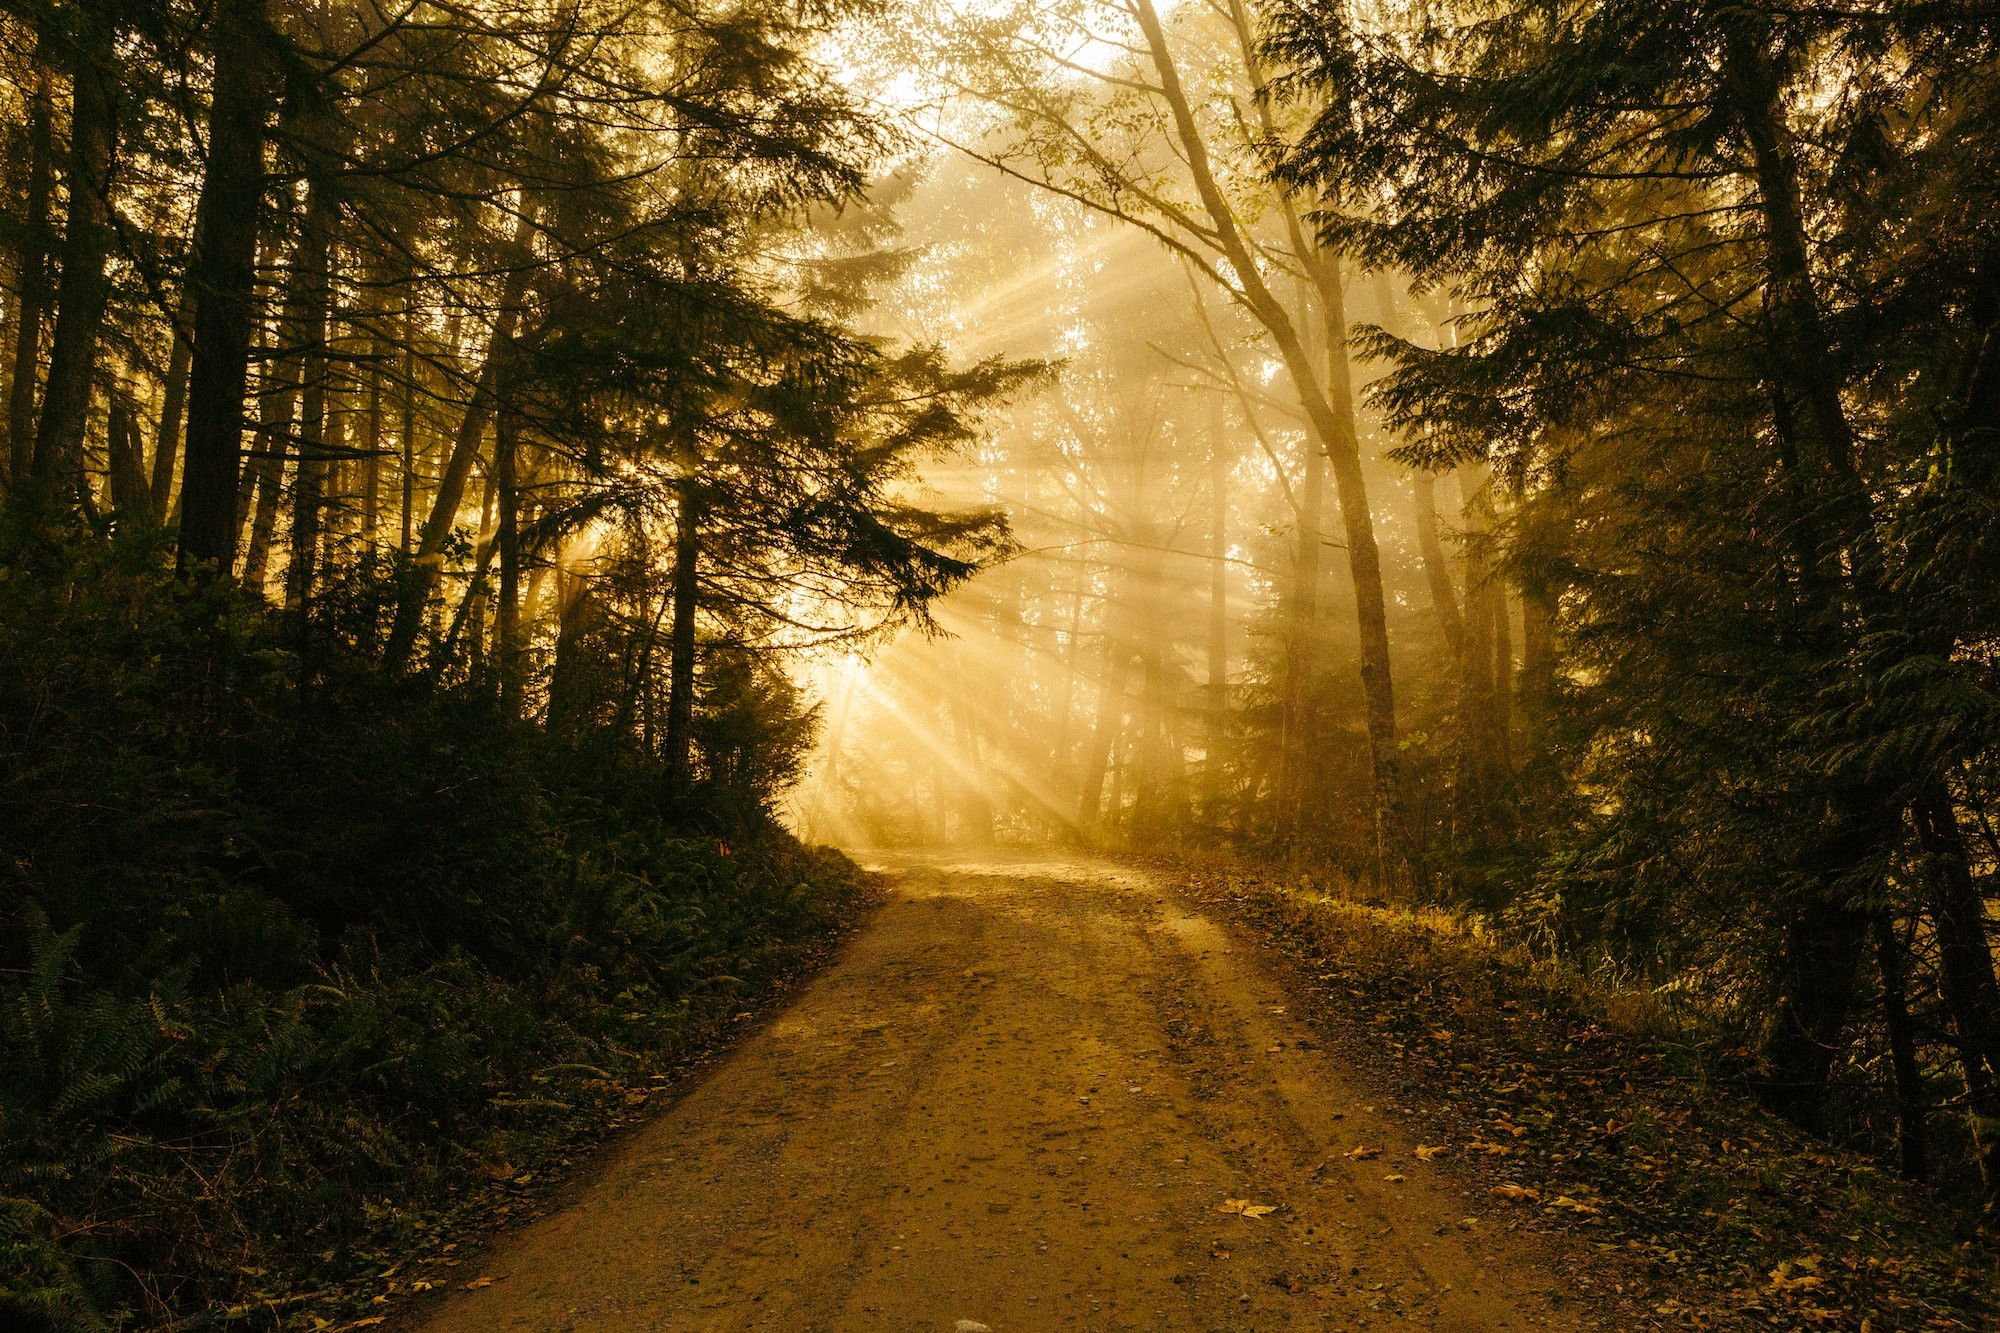 Image of a trail leading through the trees with sunshine in the background.